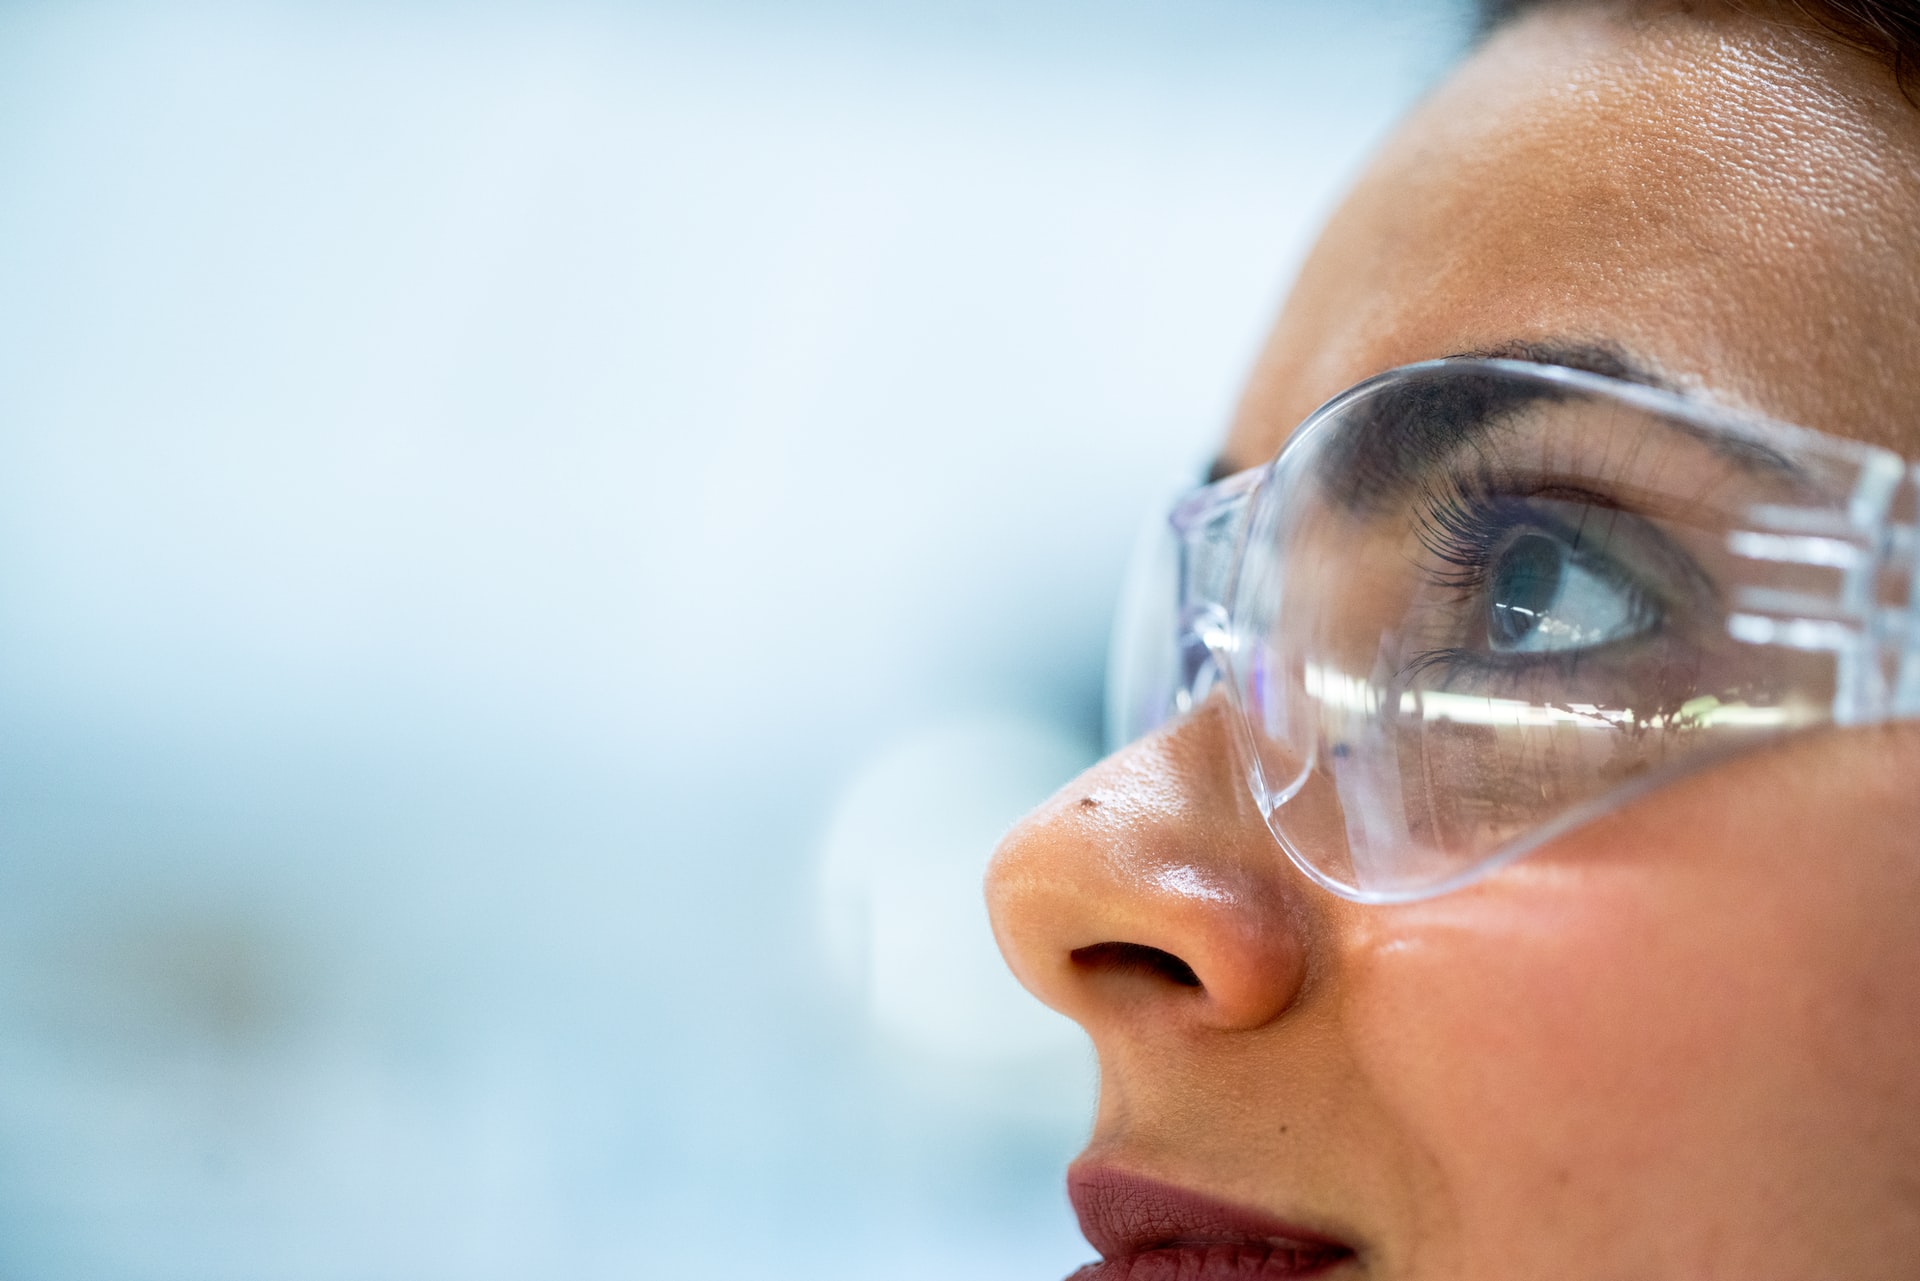 A woman works on process analytical technology at her career as a senior scientist.